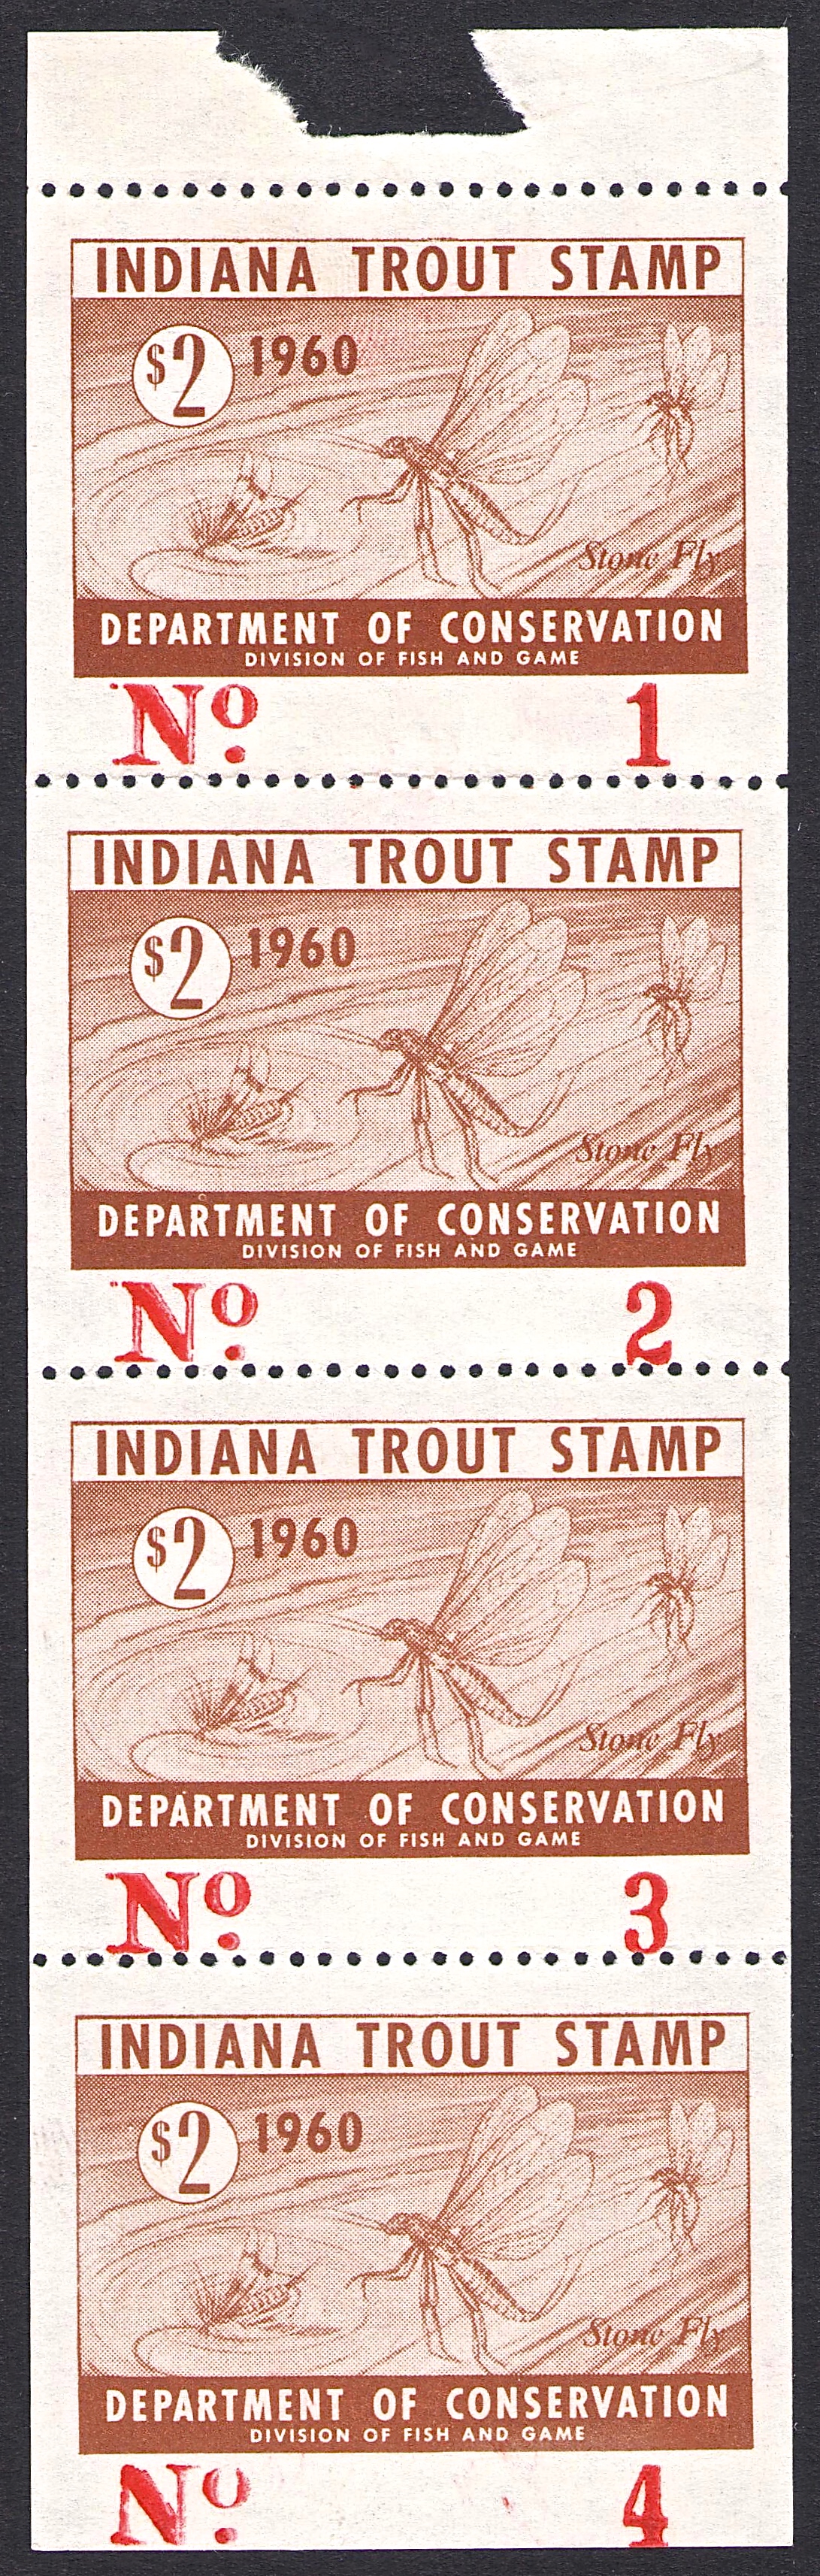 1960 Indiana Trout Serial Numbers 1-4 Complete Pane